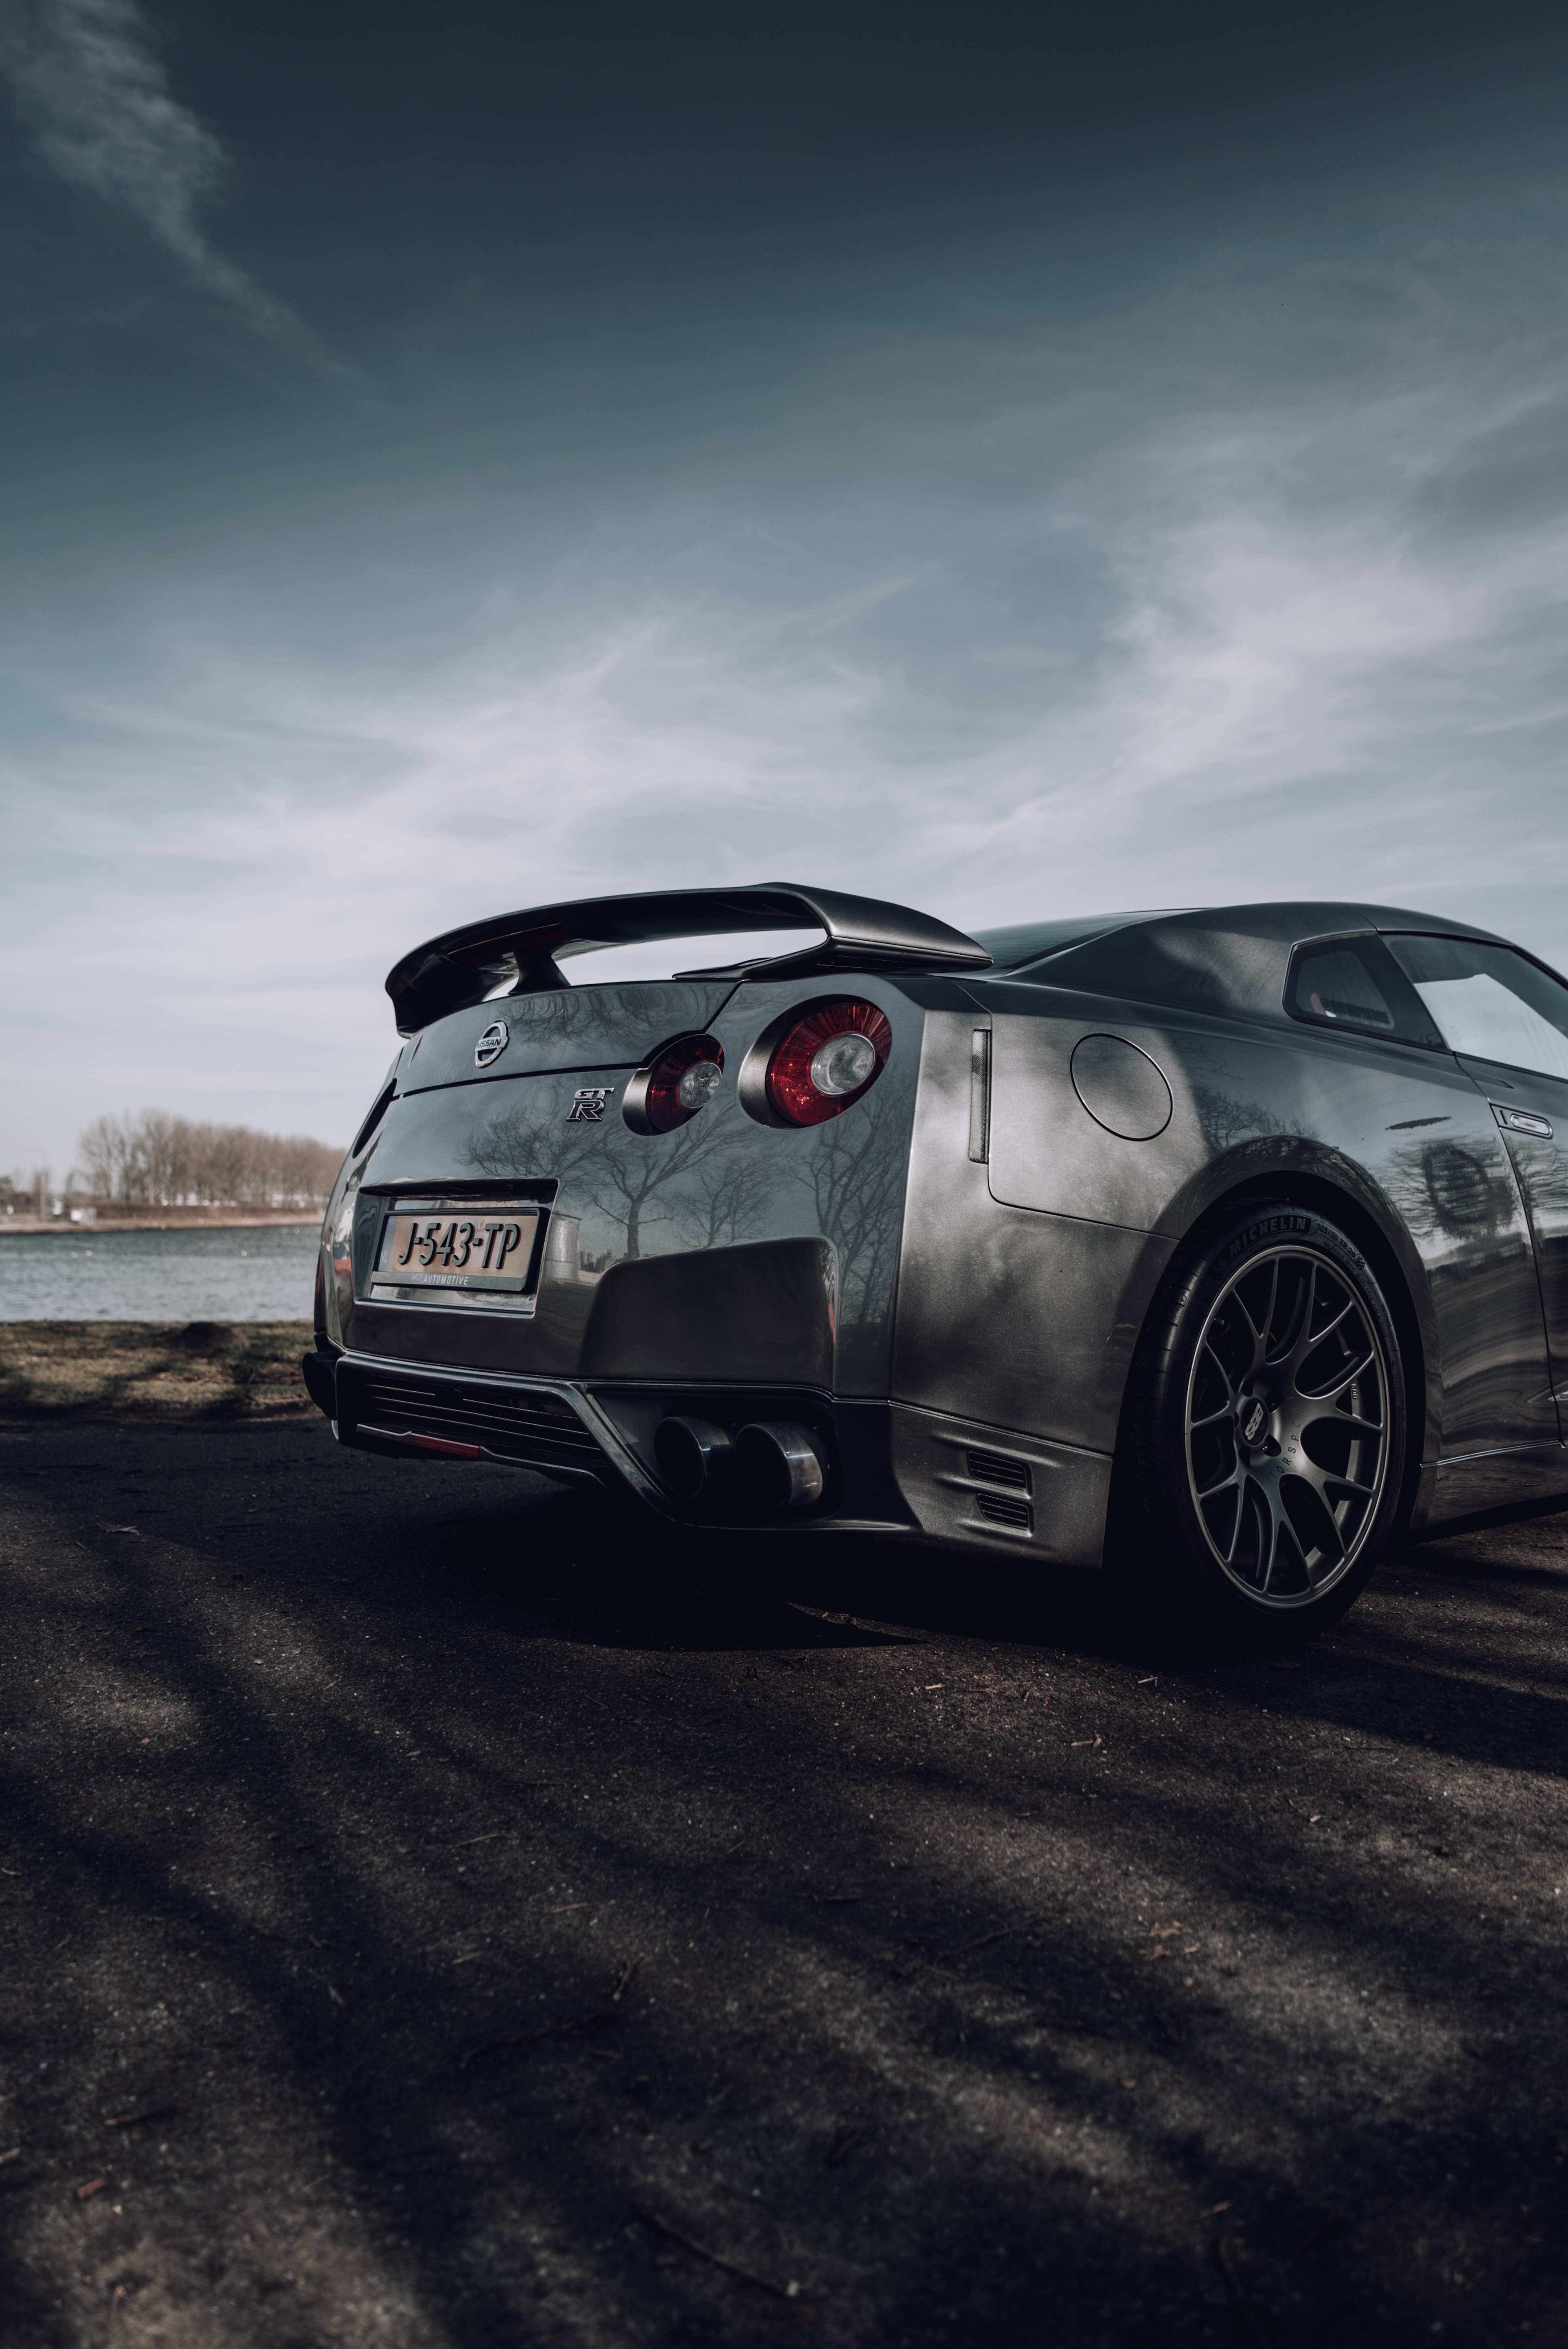 nissan, cars, road, car, side view, silver, nissan gt-r